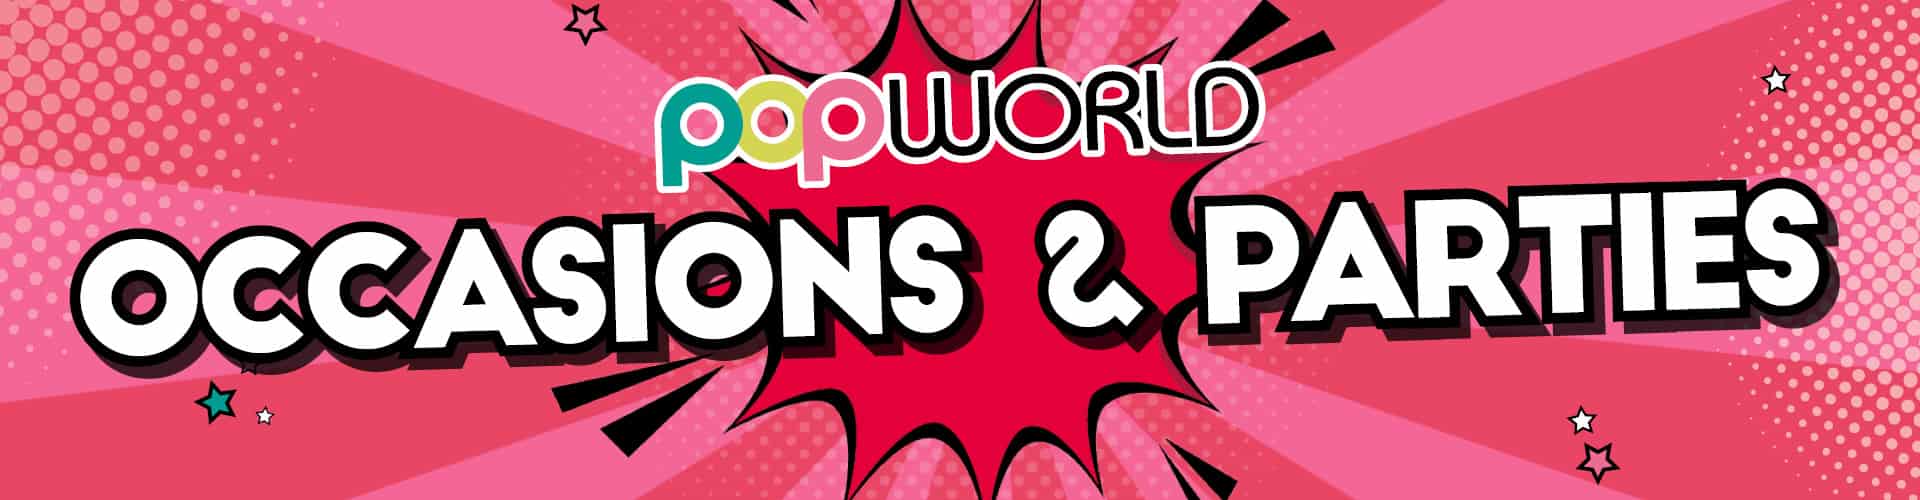 Occasions and Parties at Popworld Birmingham